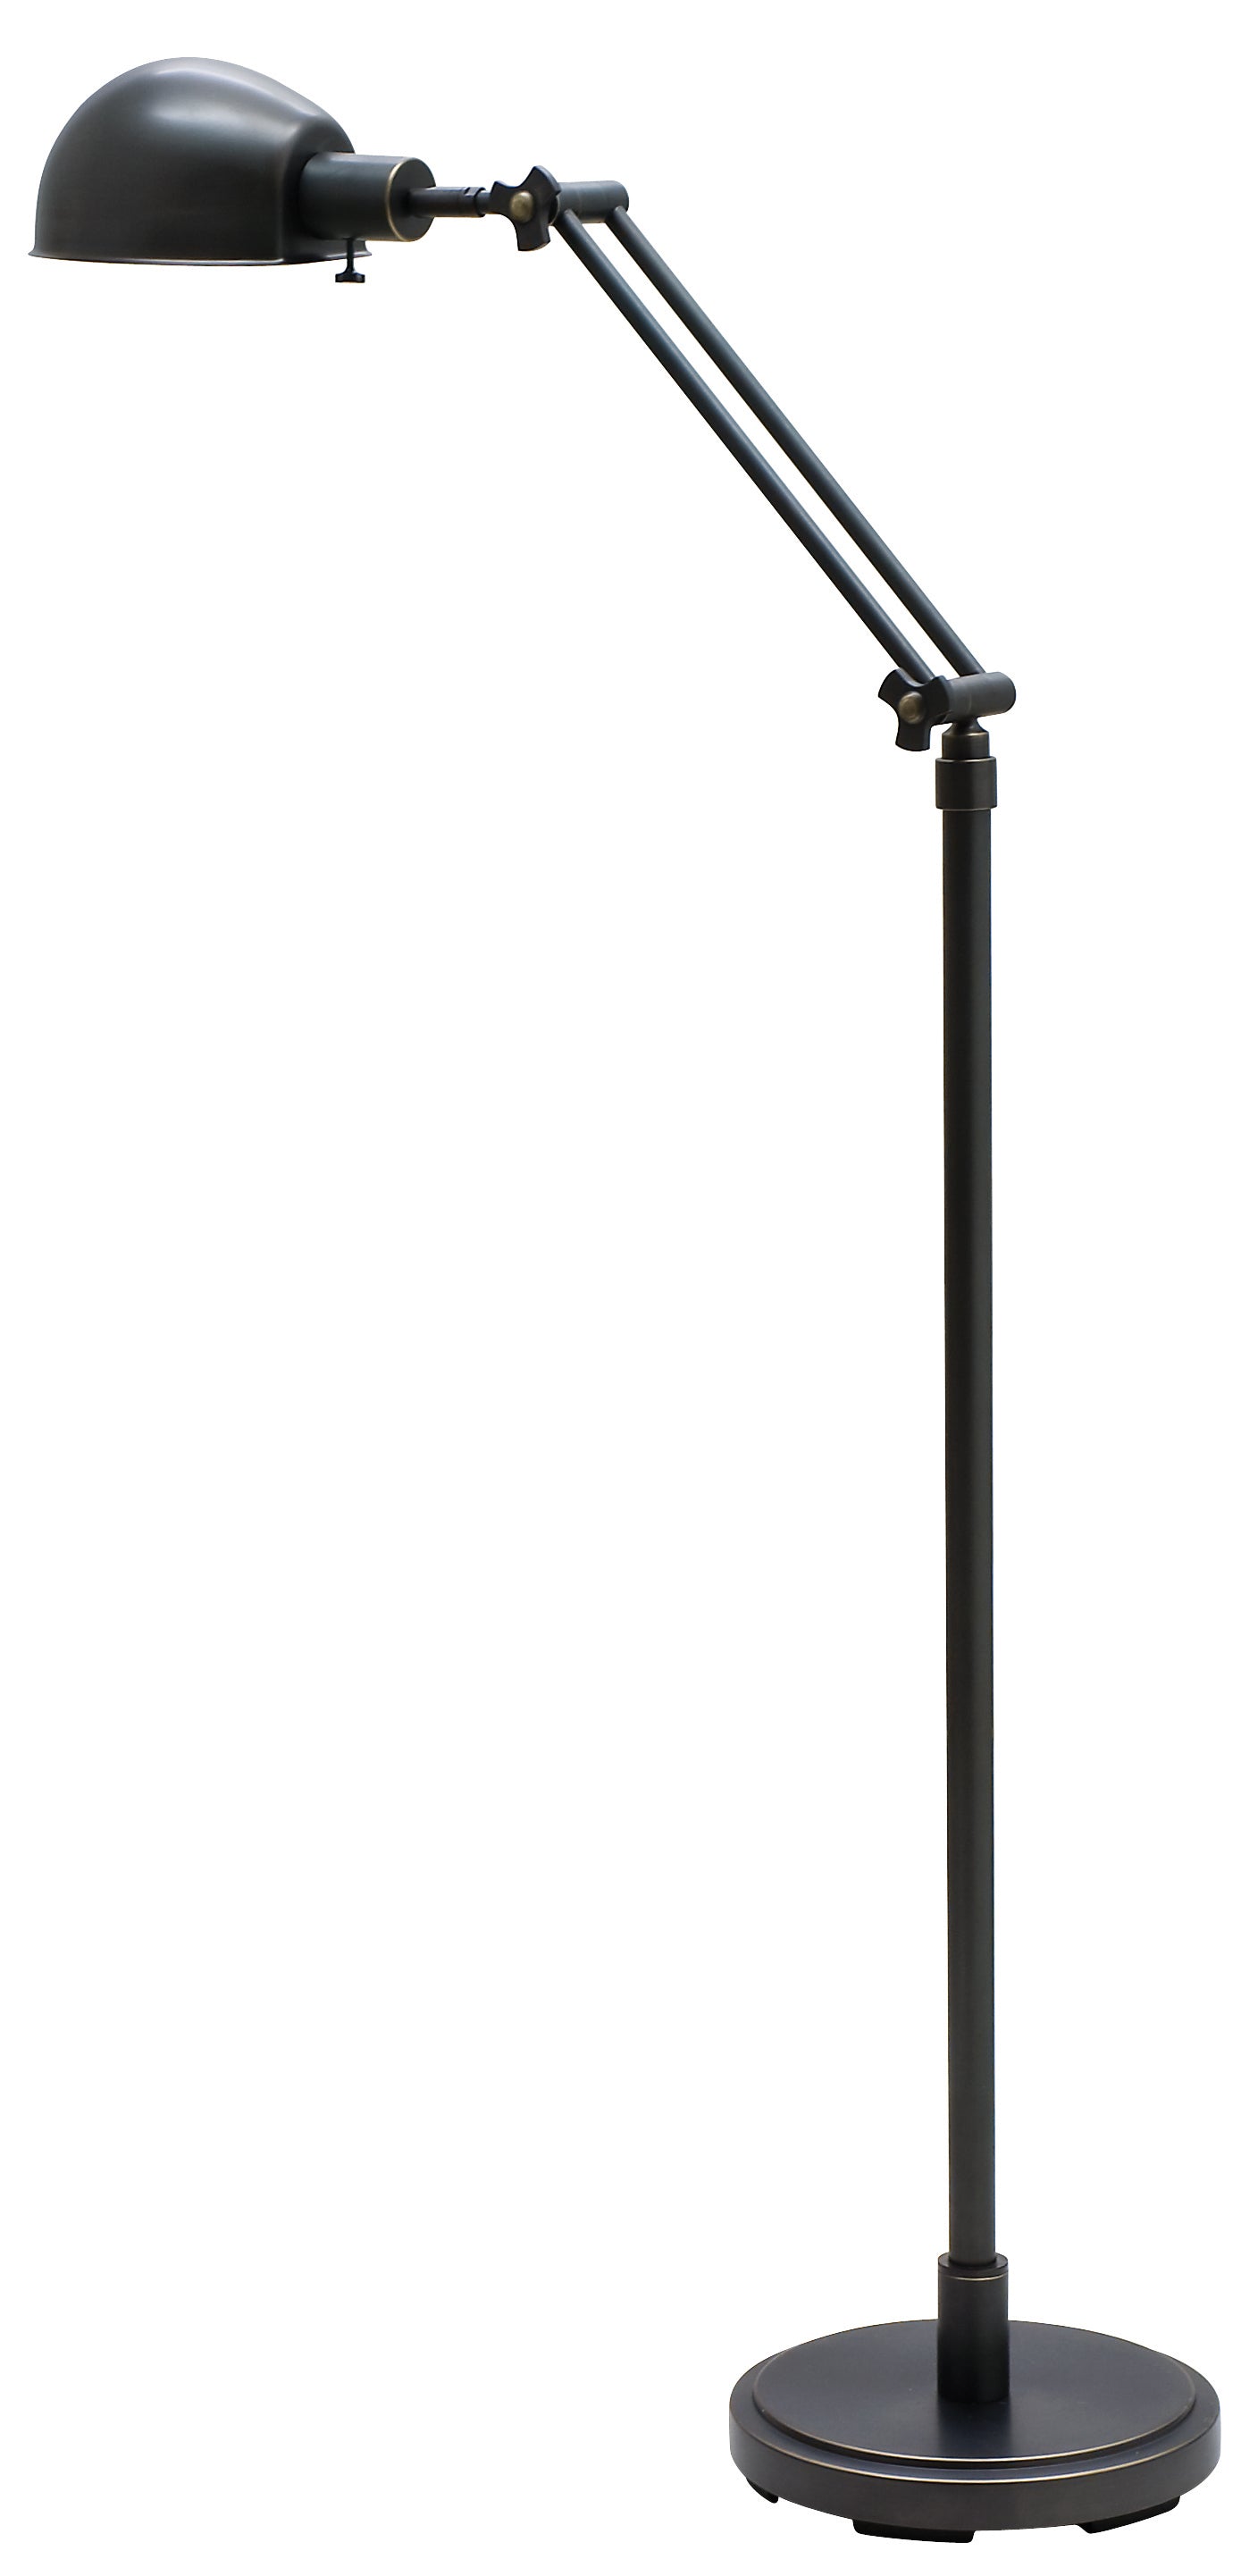 House of Troy Addison Adjustable Oil Rubbed Bronze Pharmacy Floor Lamp AD400-OB